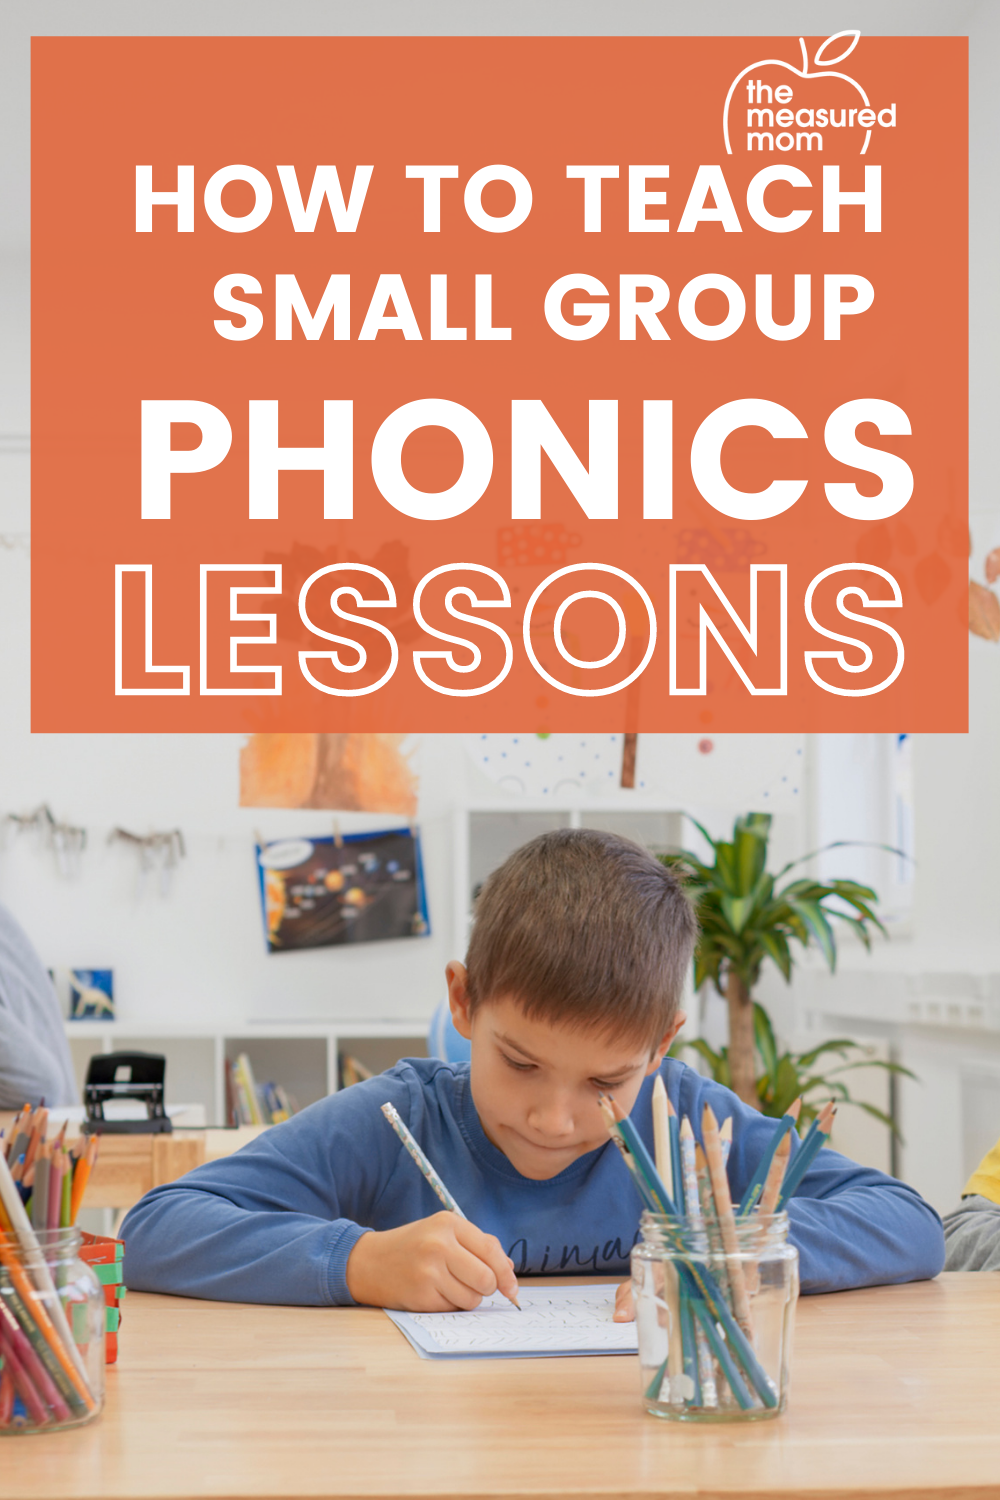 How to give small group phonics lessons - The Measured Mom